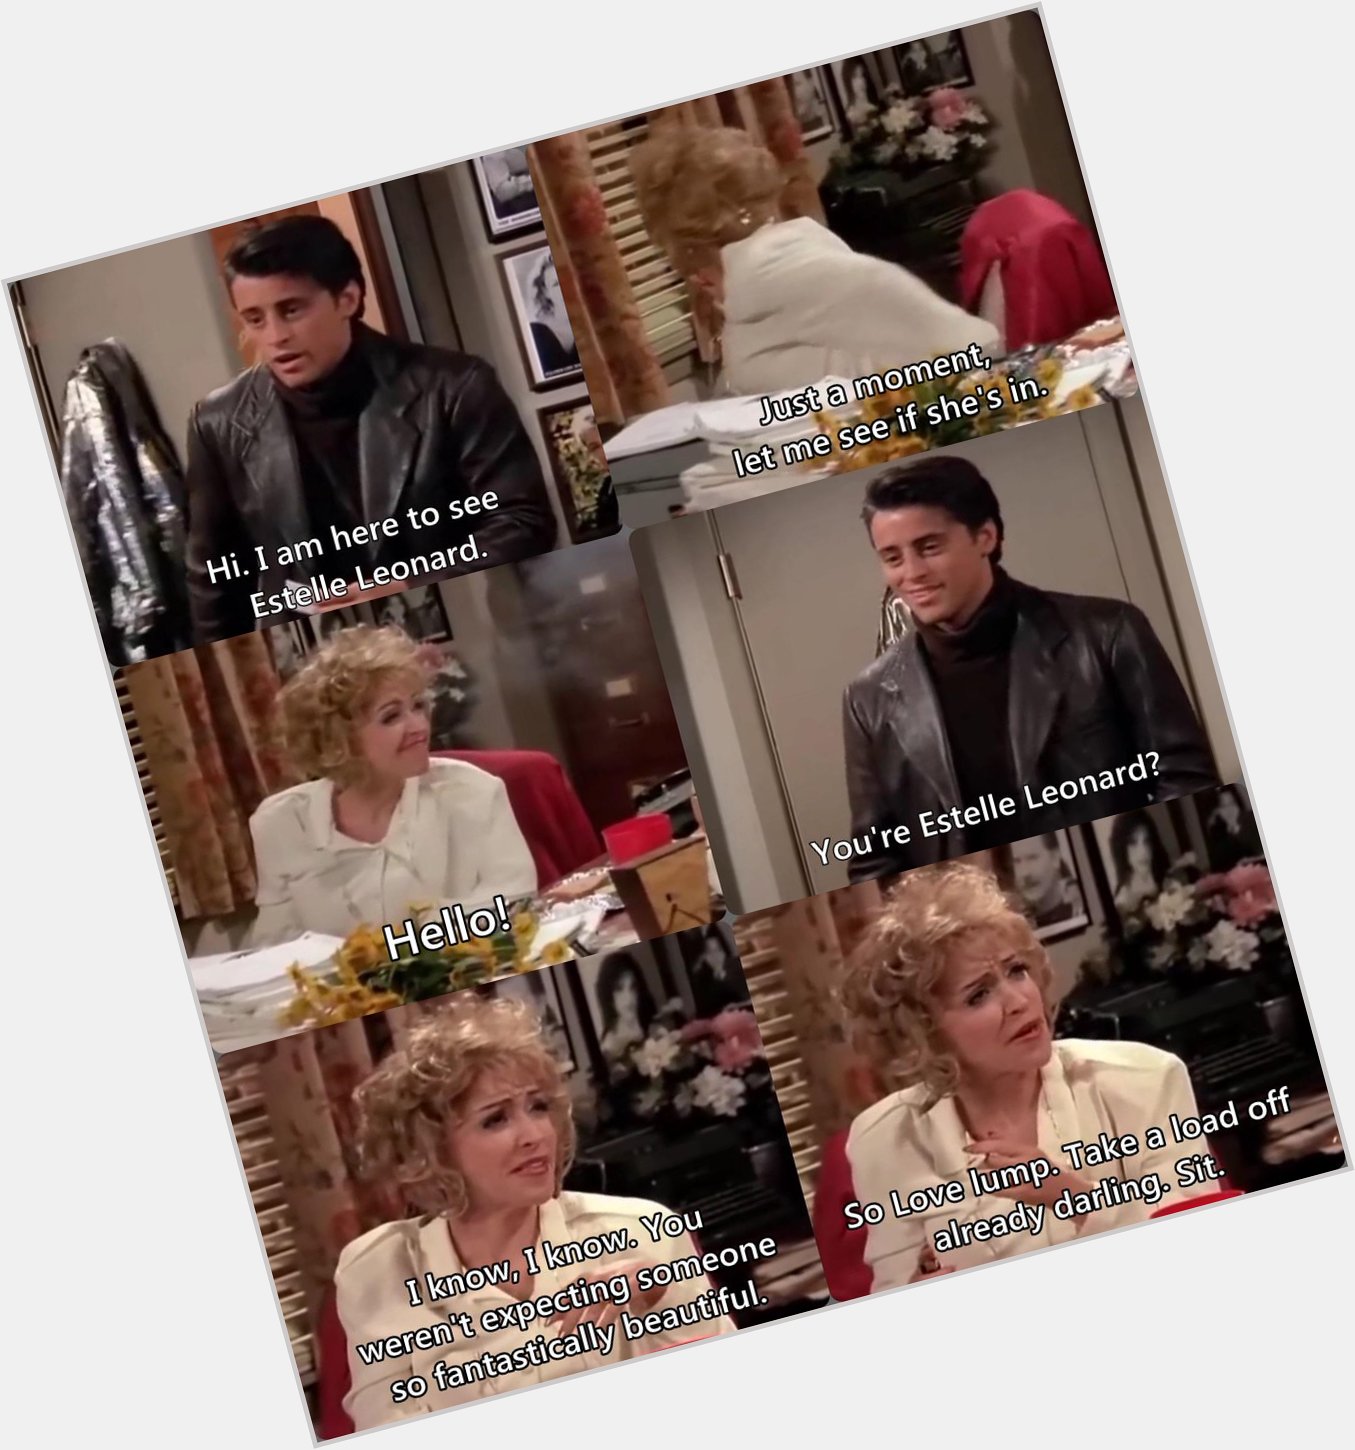 We wish a very happy birthday to June Gable :) Her performance as Estelle in Friends won many hearts! 